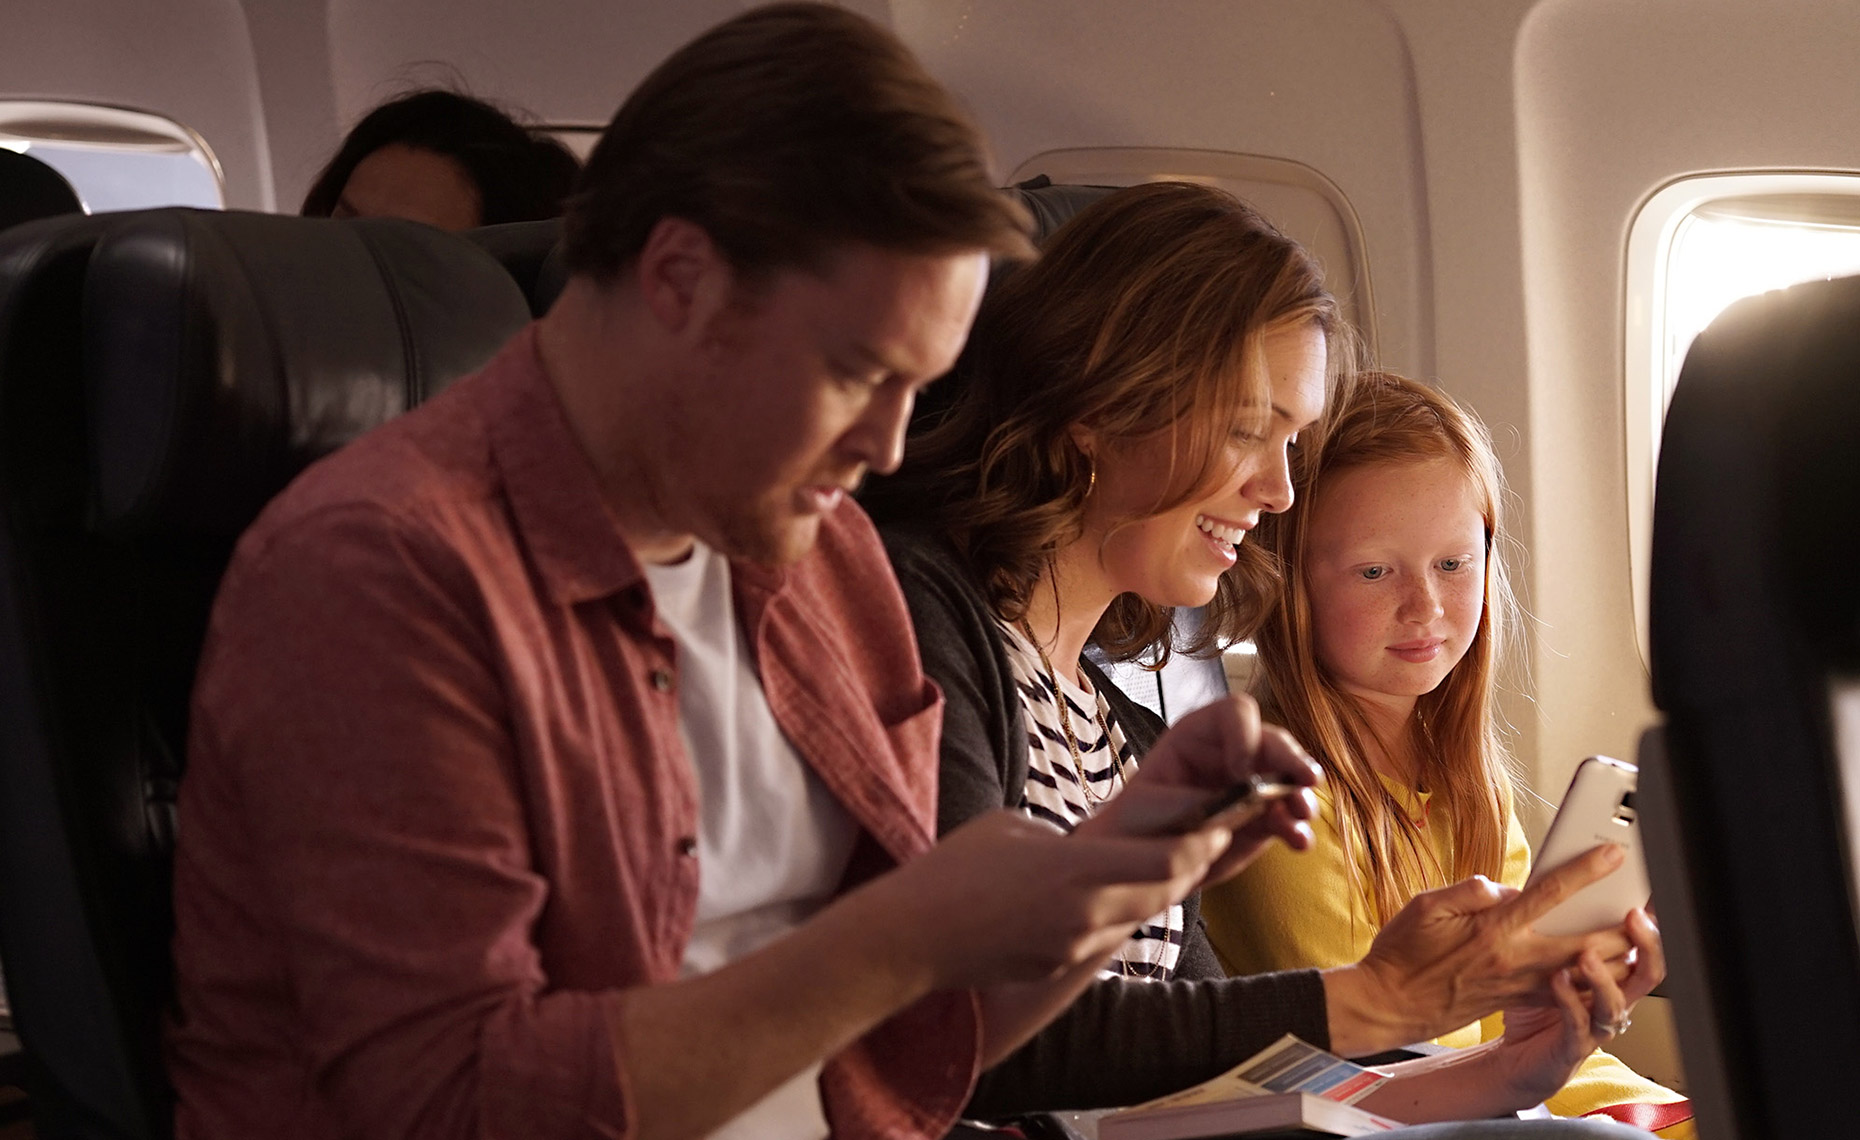 Commercial Travel Photography by Roger Snider - Family on plane to Mexico vacation .